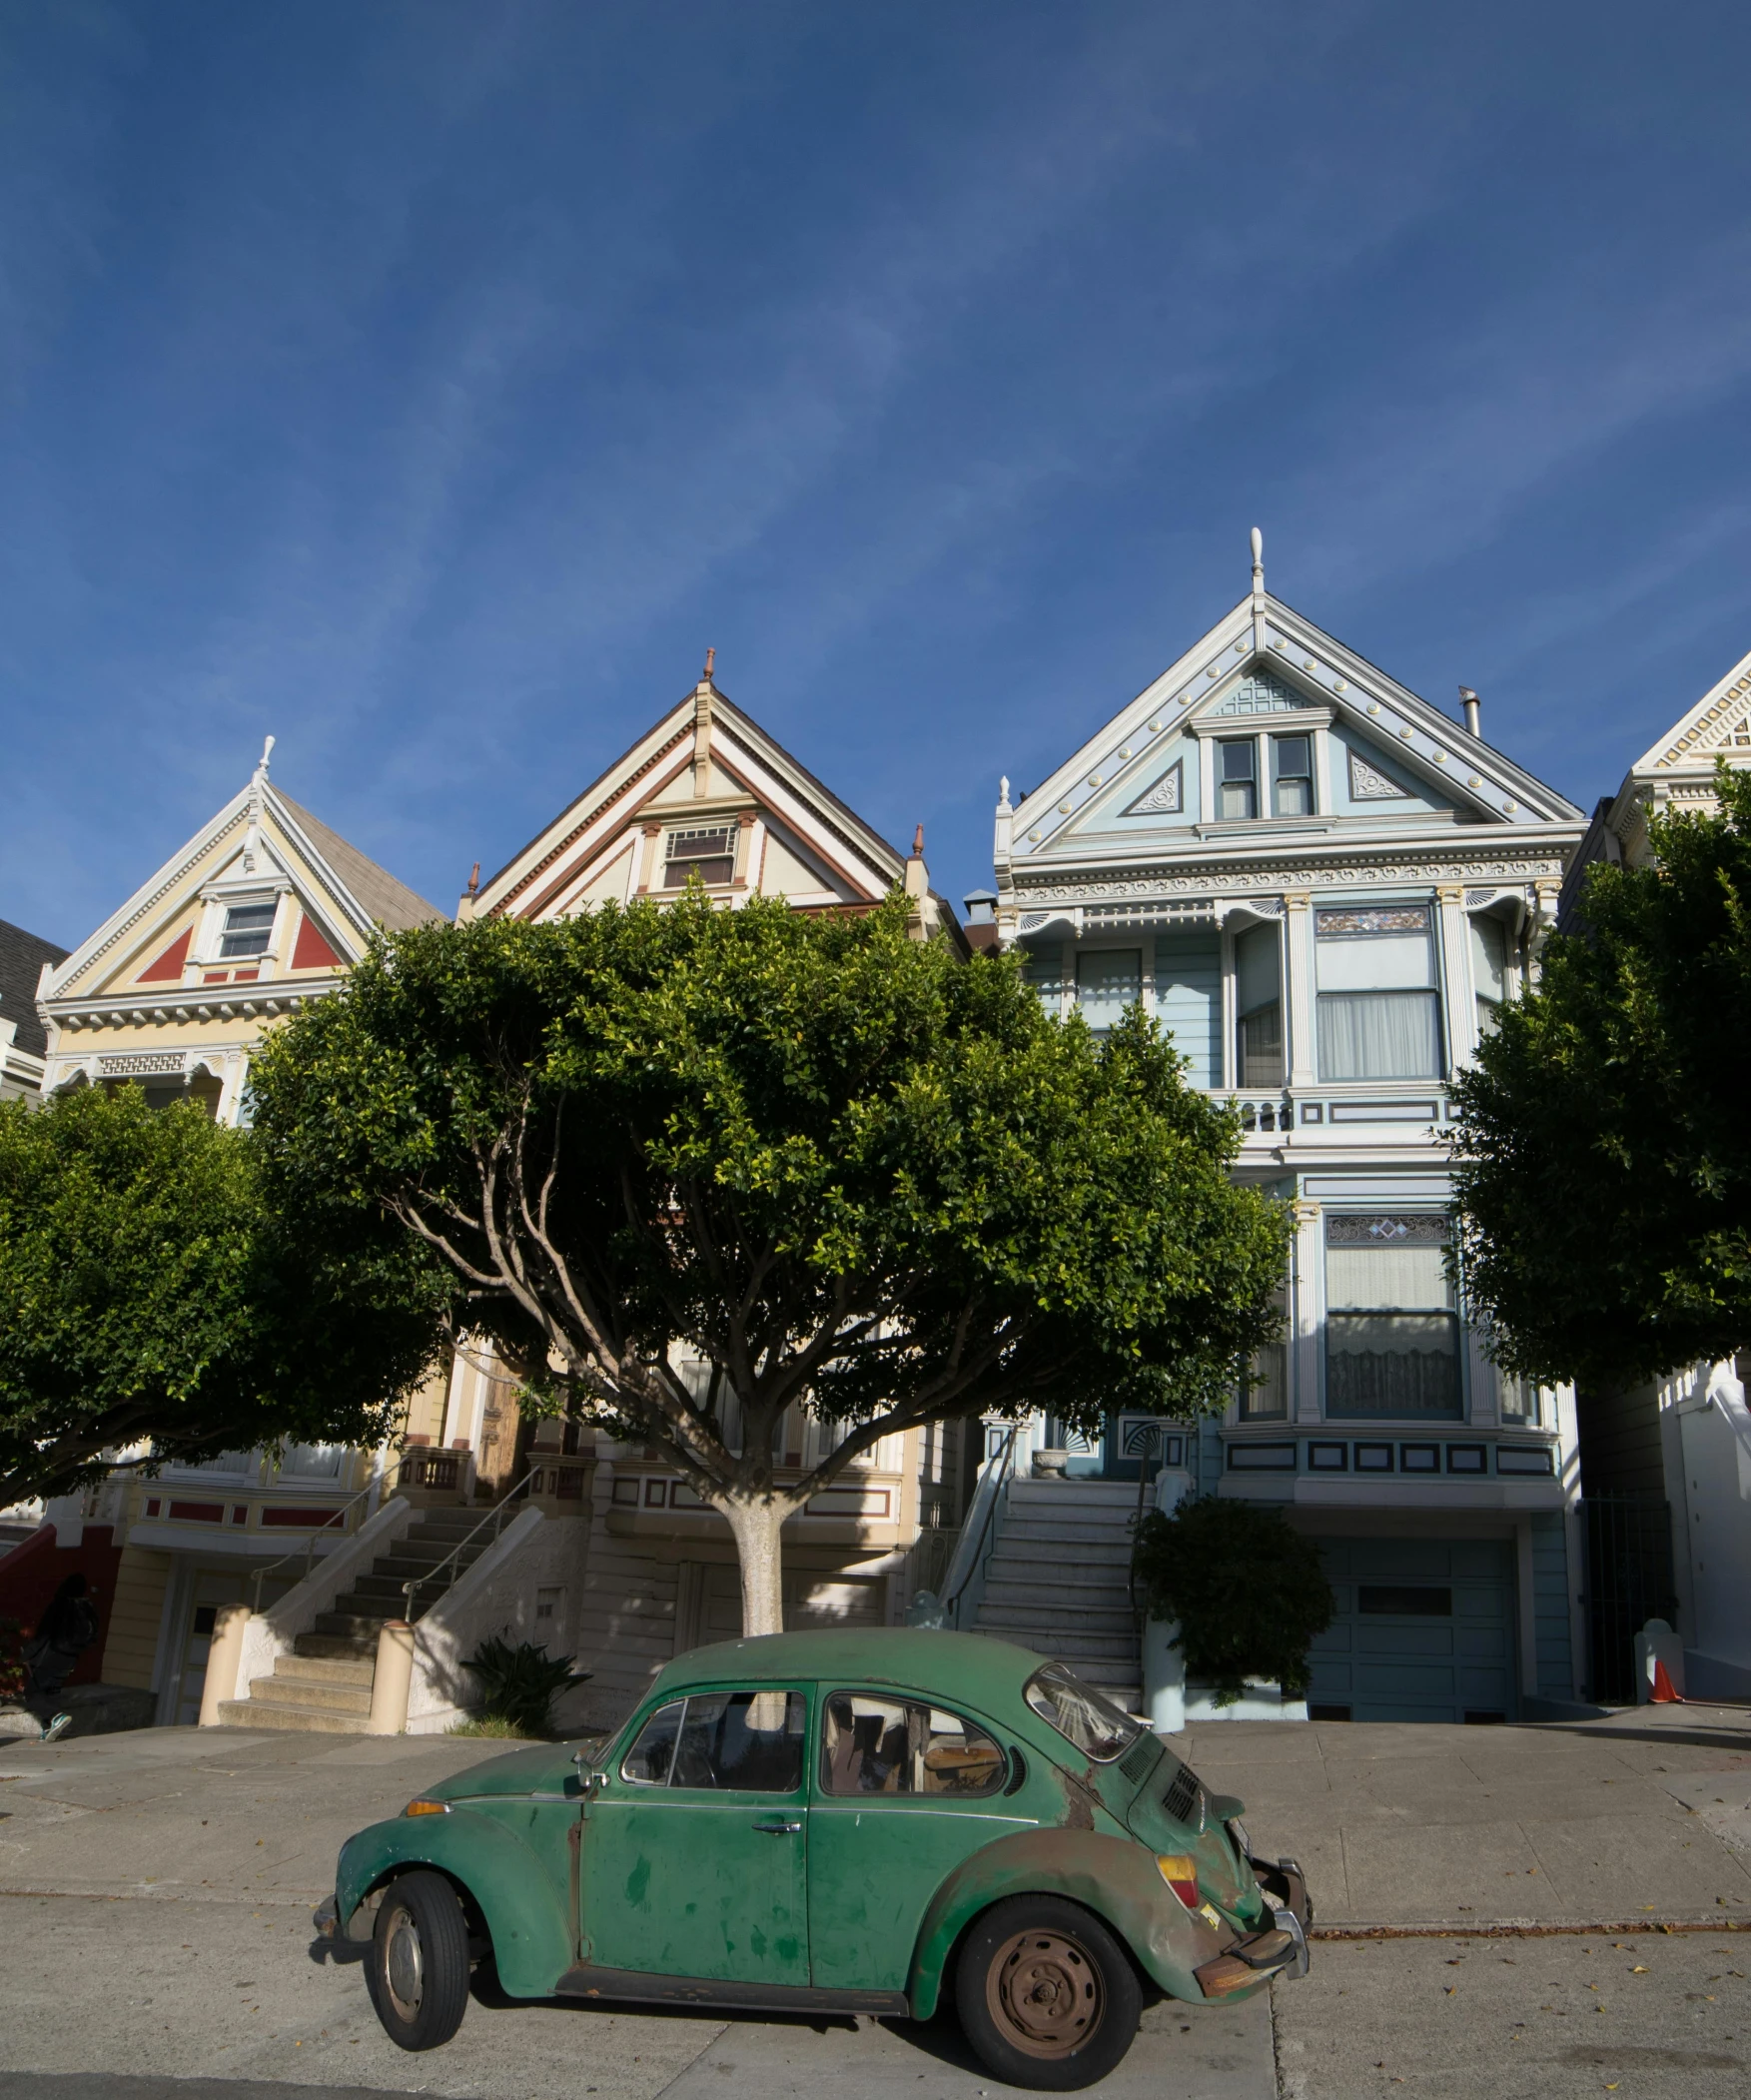 an old green car is parked in front of some houses